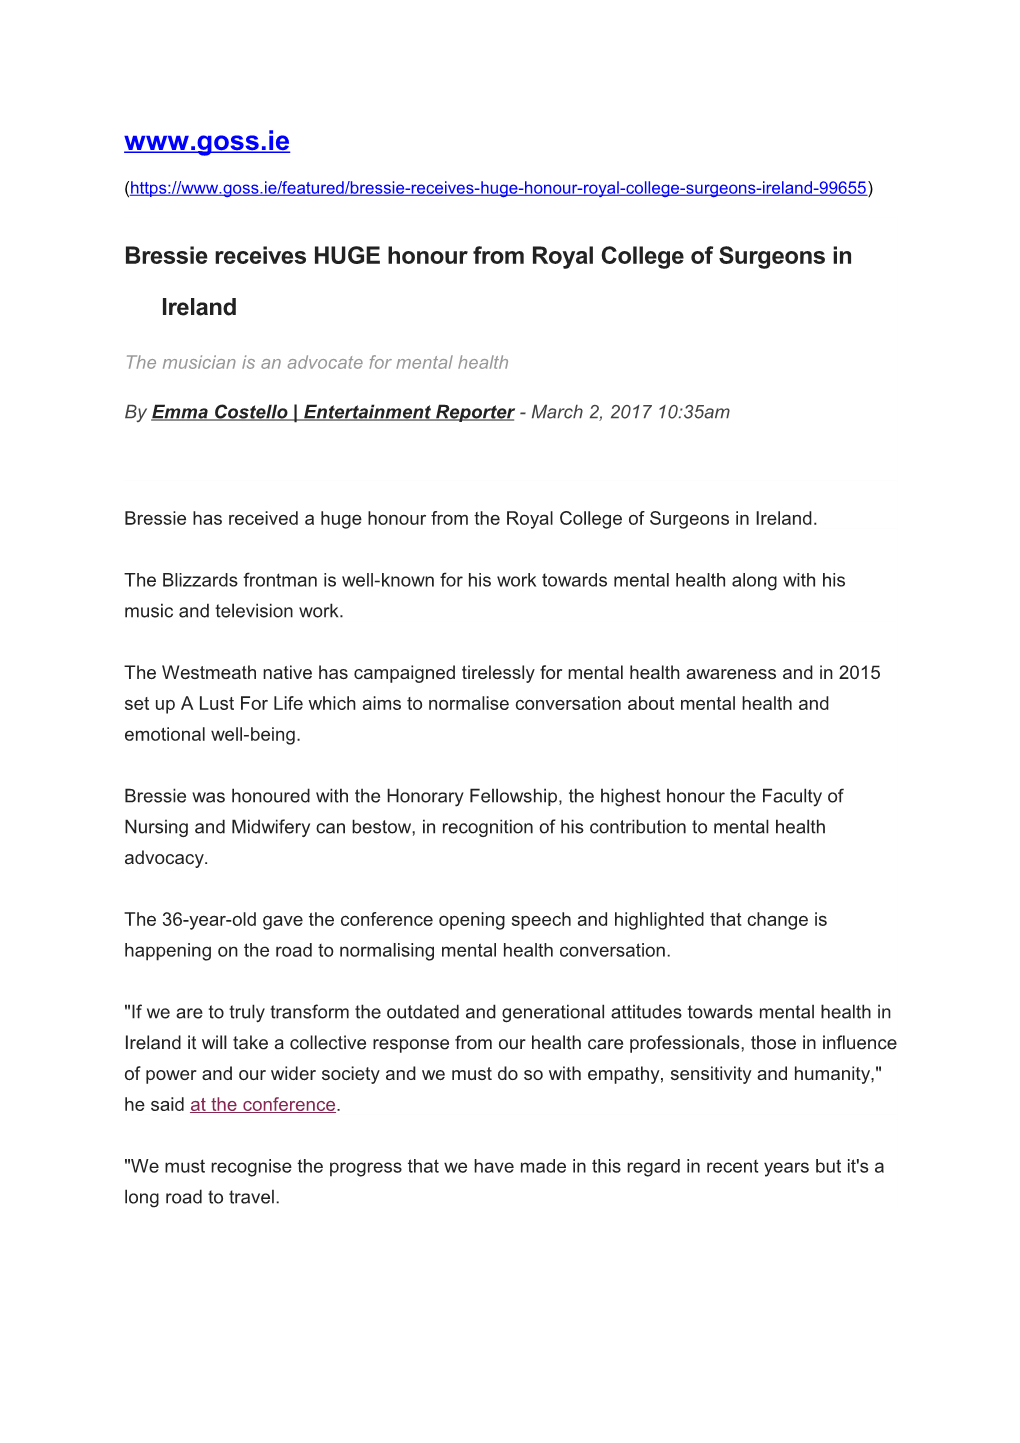 Bressie Receives HUGE Honour from Royal College of Surgeons in Ireland